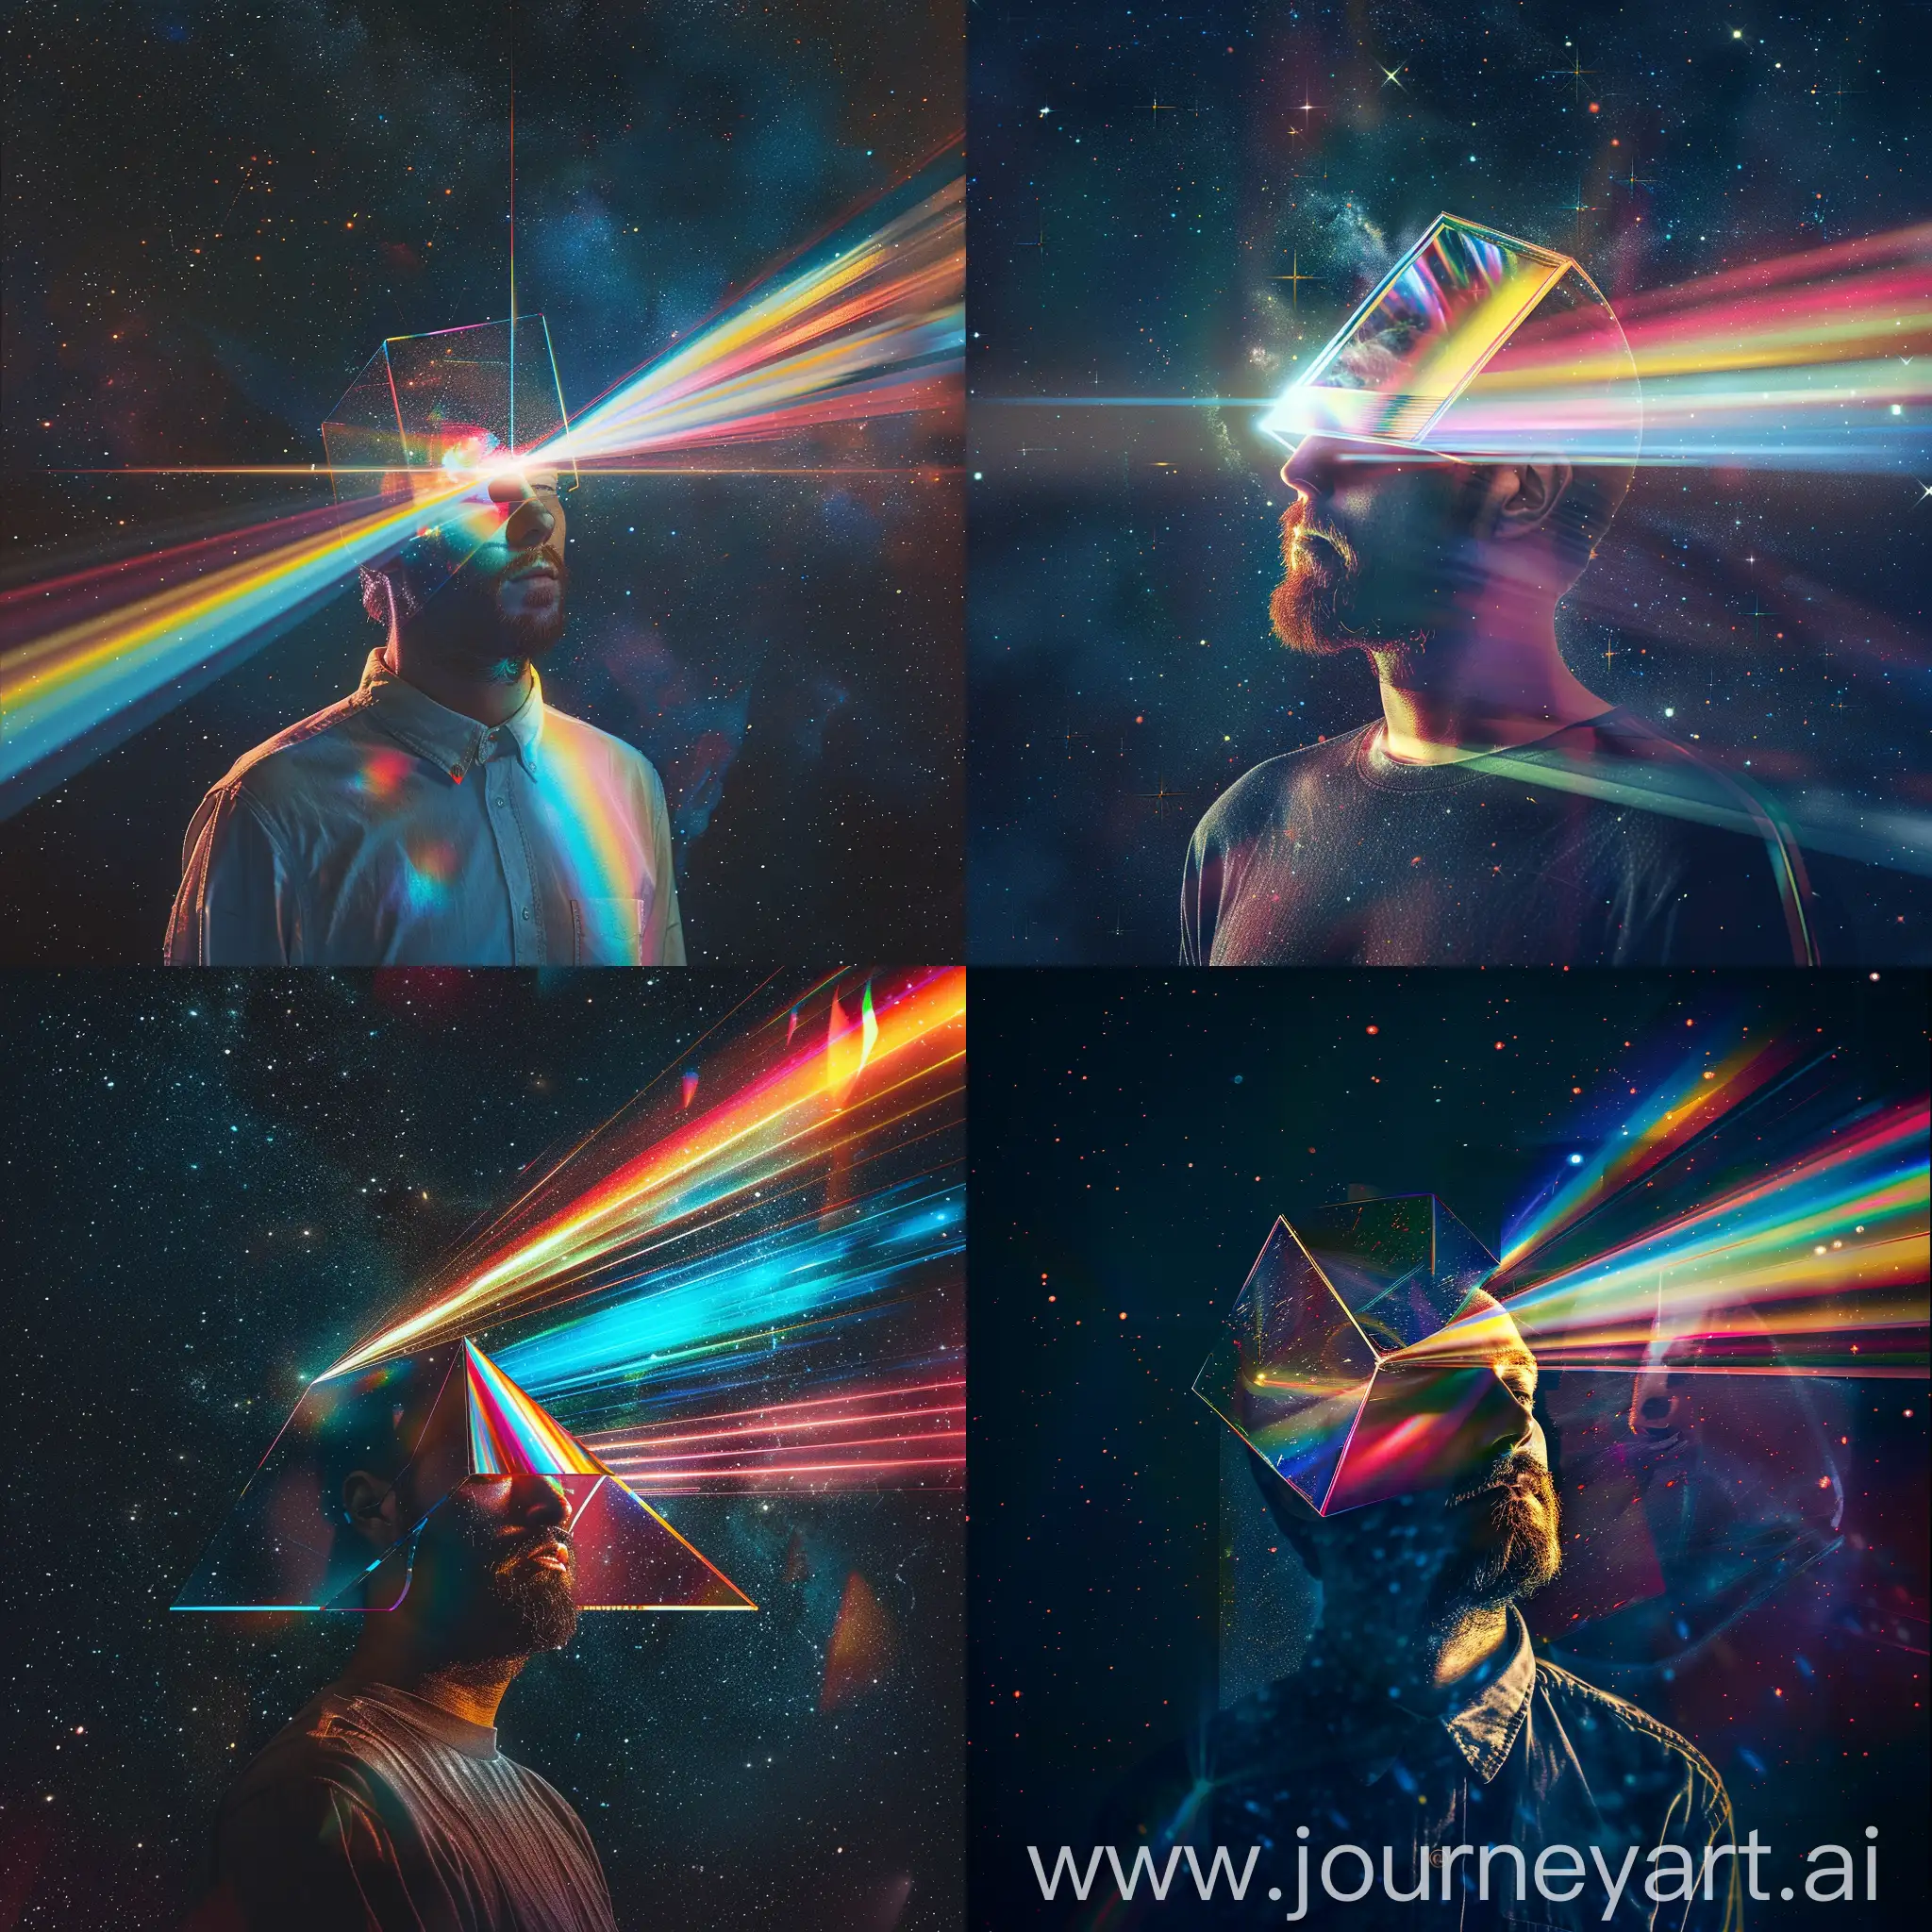 Surreal-Portrait-Man-with-Prism-Head-Amid-Colorful-Light-Beams